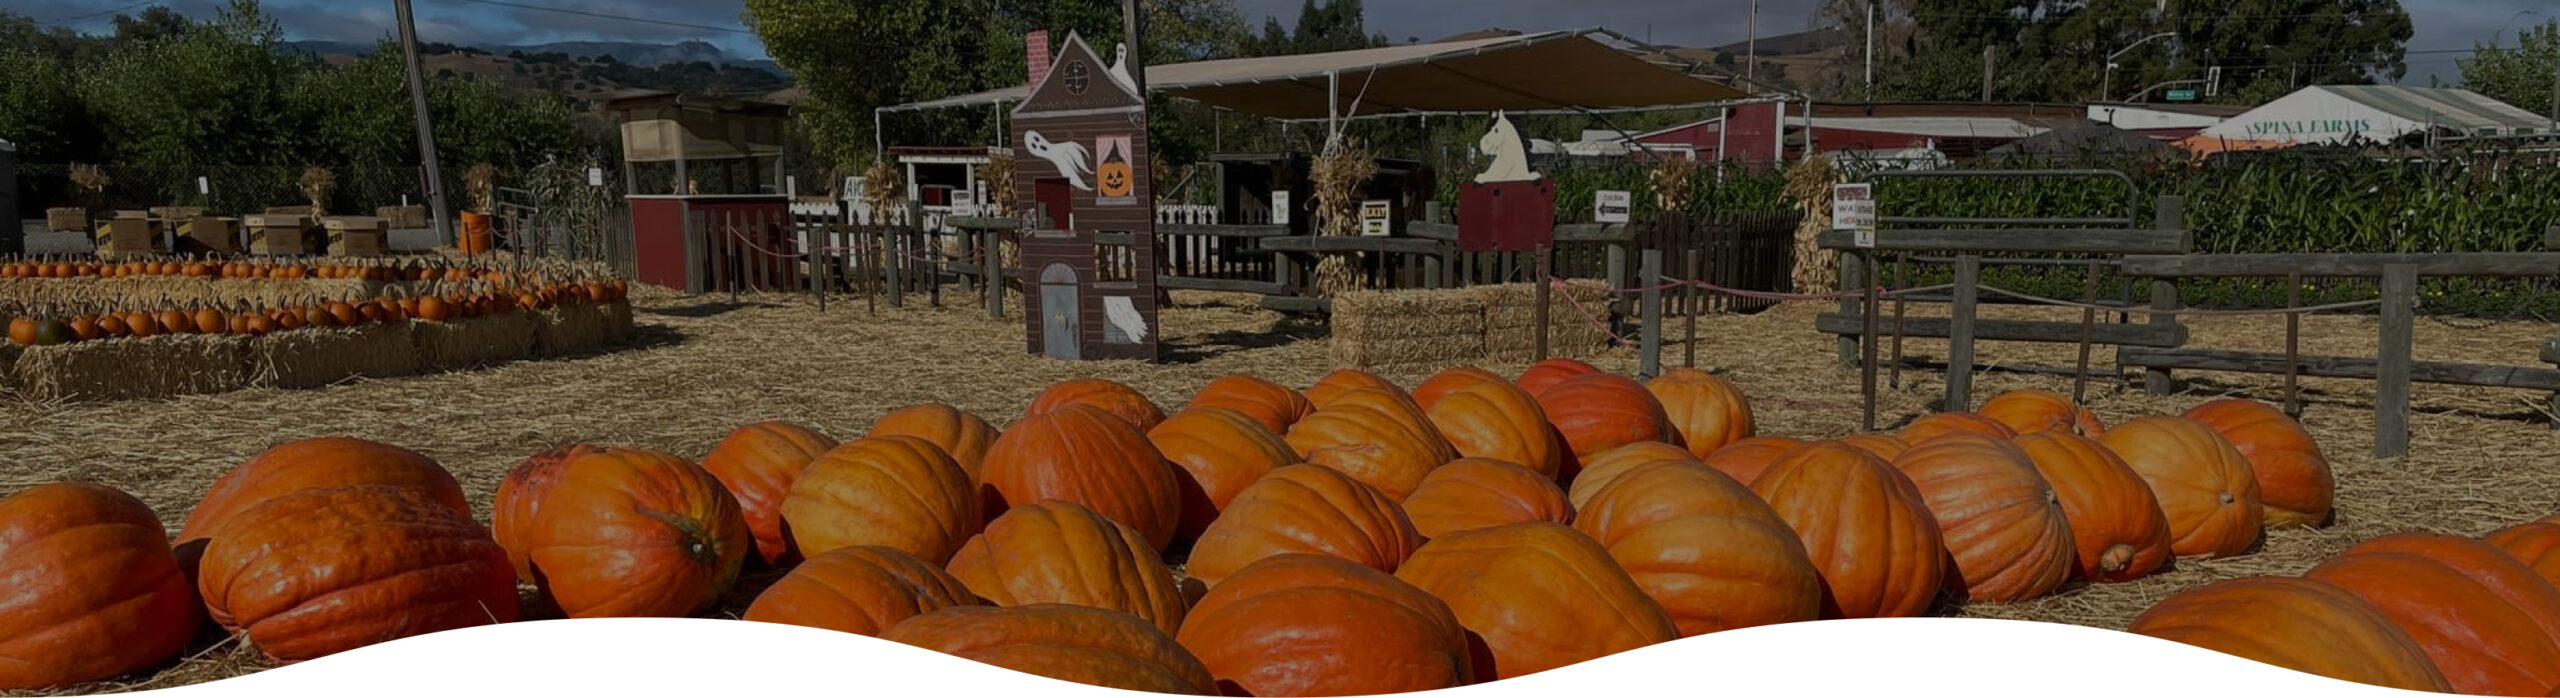 About Spina Farms Pumpkin Patch